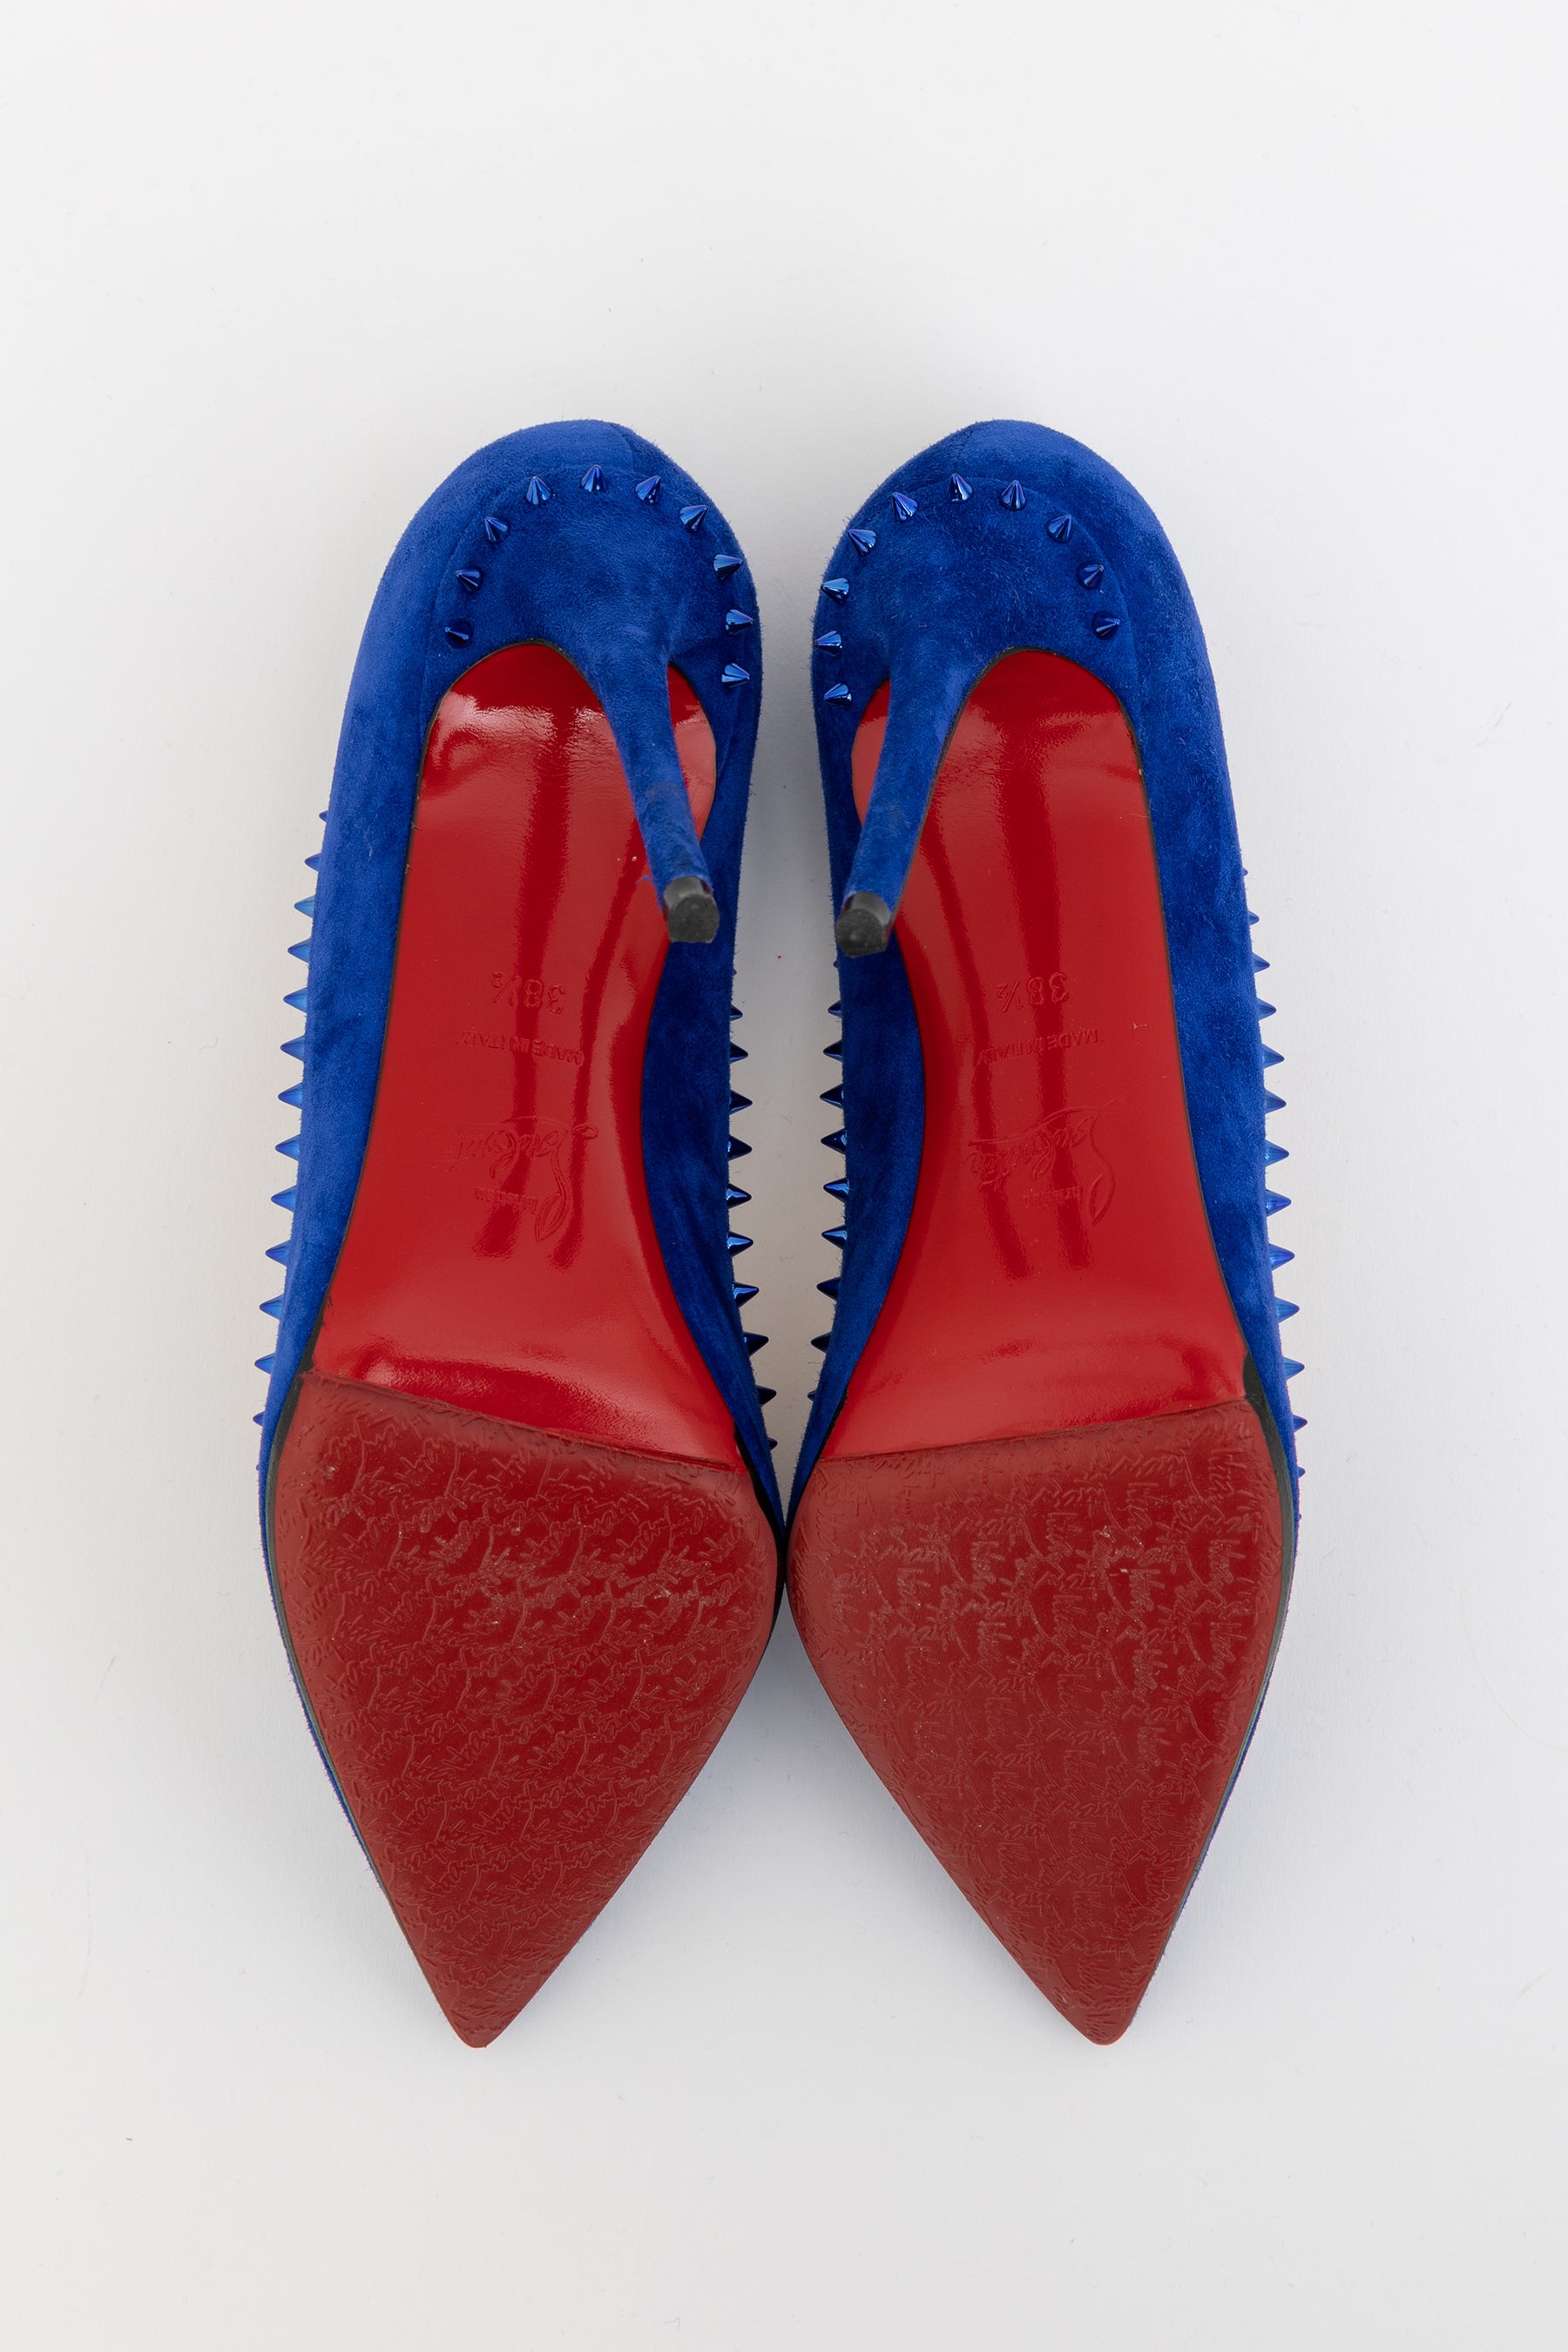 Anjalina Spiked Suede Pumps